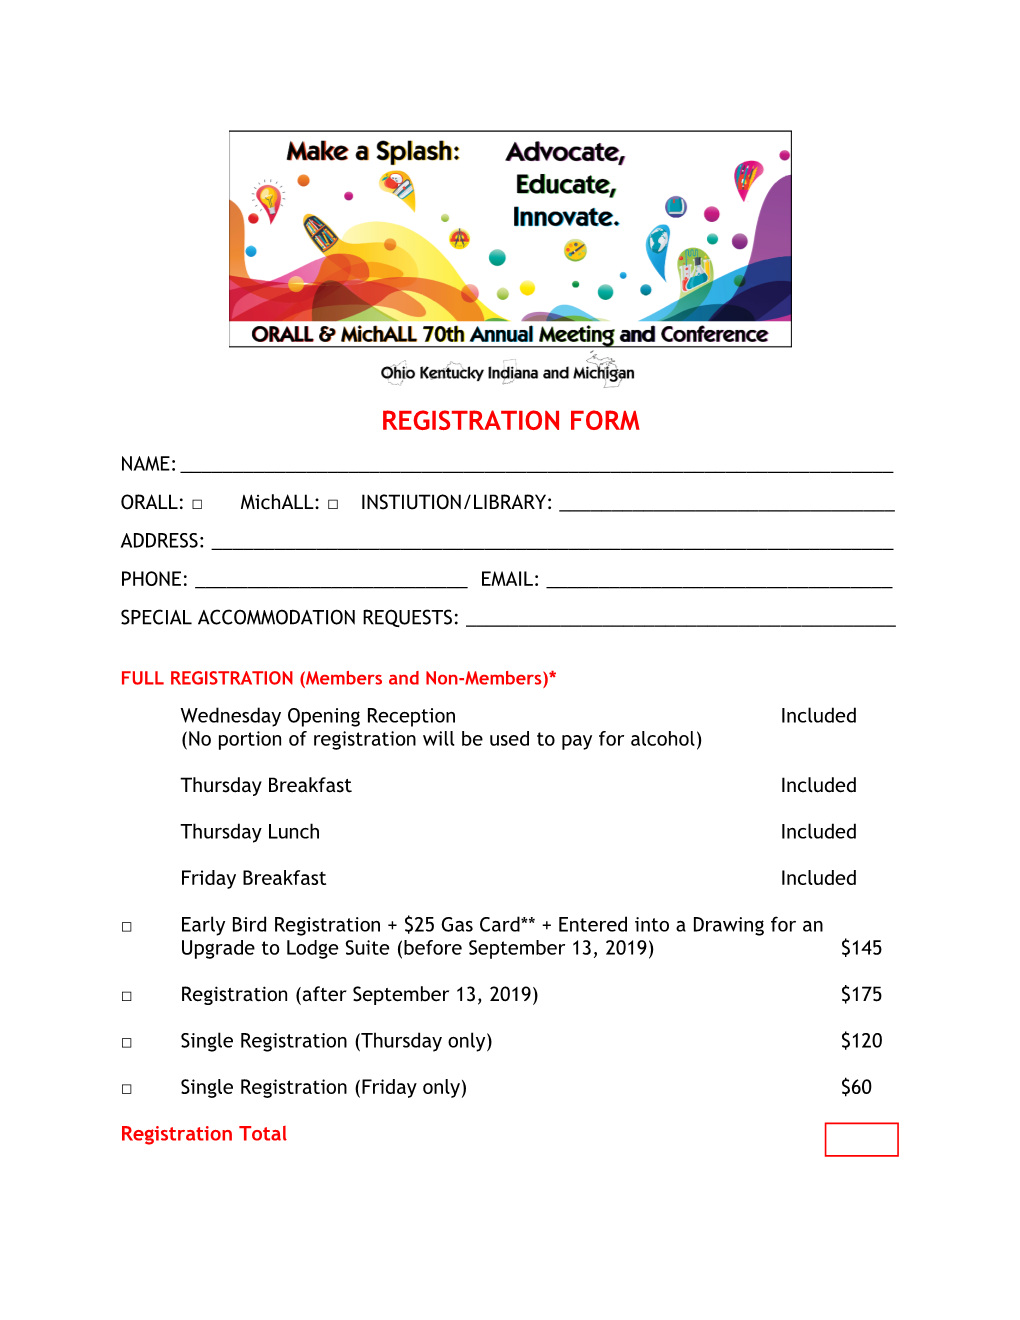 2019 ORALL Conference Registration Form